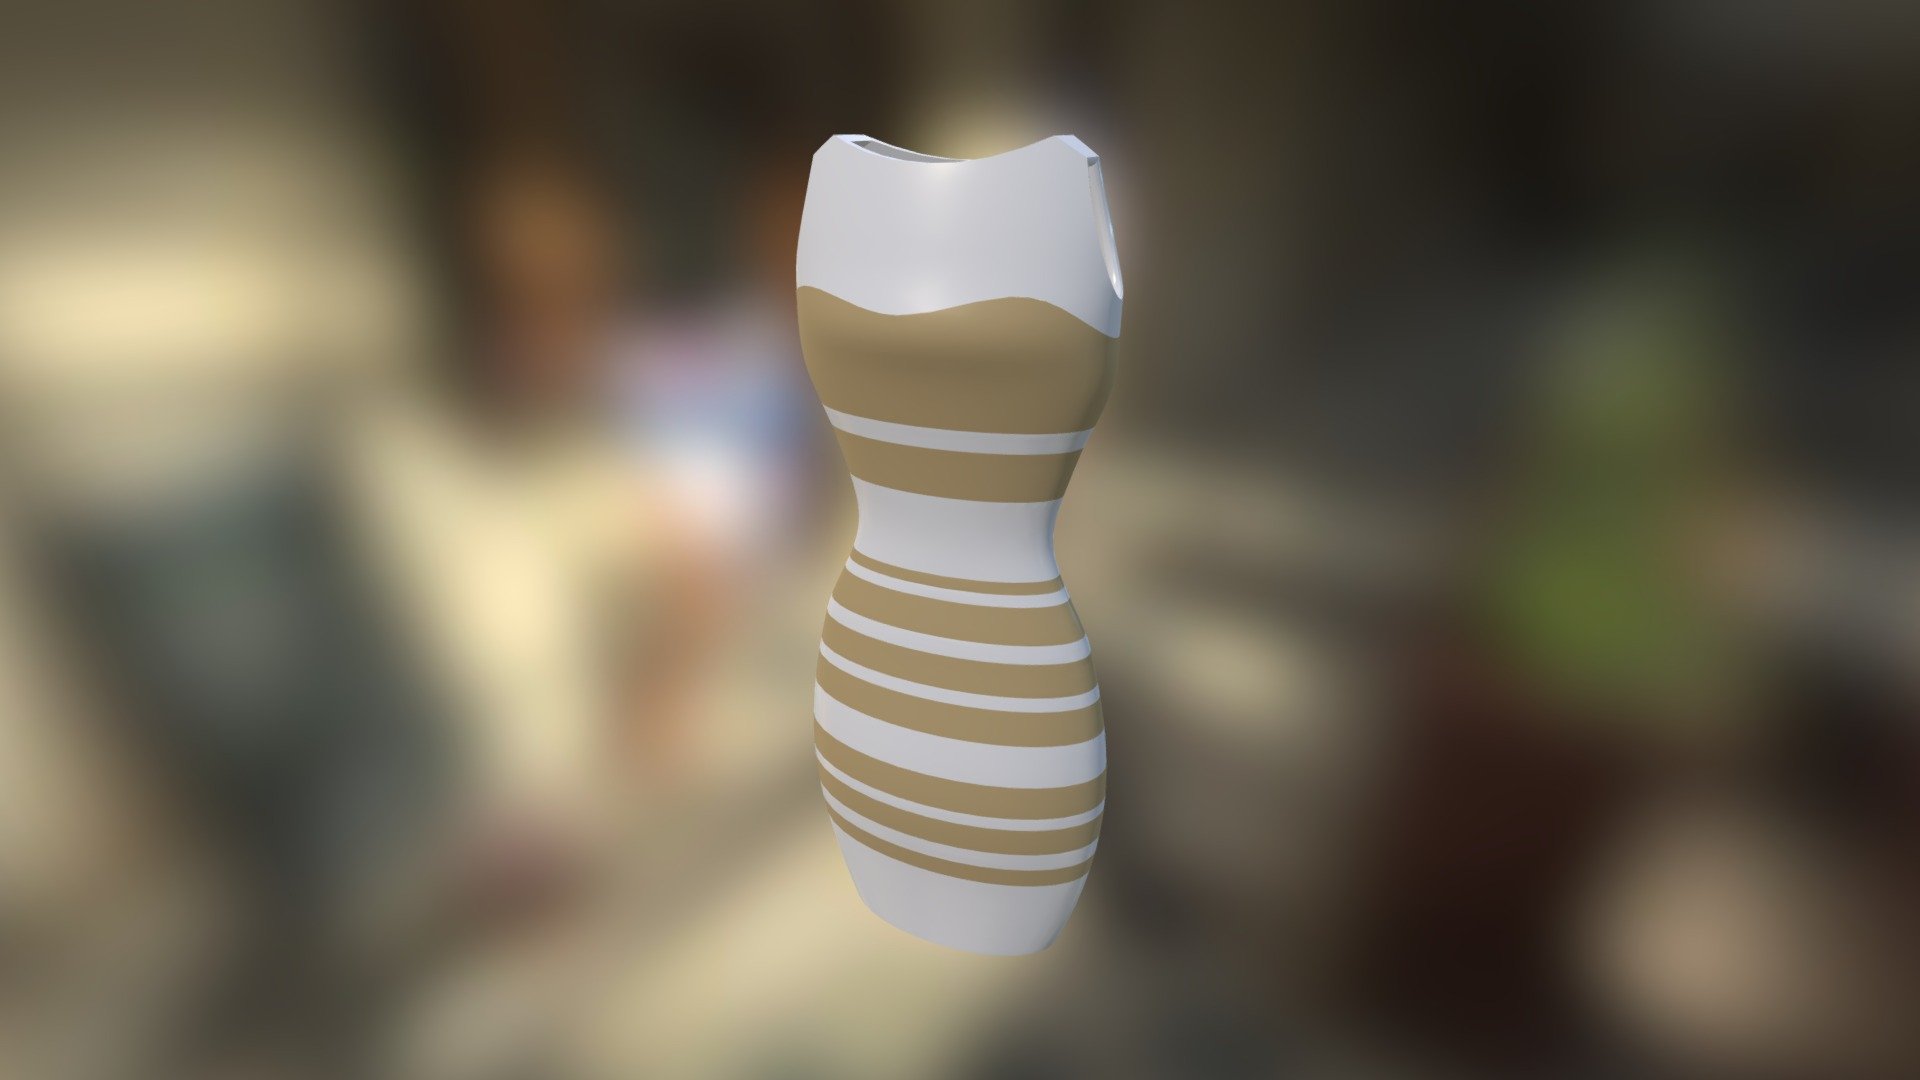 3D printable dress designed by Tinkerine, after the buzz around the Blue/Black or White/Gold dress.

White/Gold: https://skfb.ly/DoQF
Black/Blue: https://skfb.ly/DoSn - YOUR UNDERSTANDING OF THE DRESS - Download Free 3D model by l o u i s (@louis) 3d model